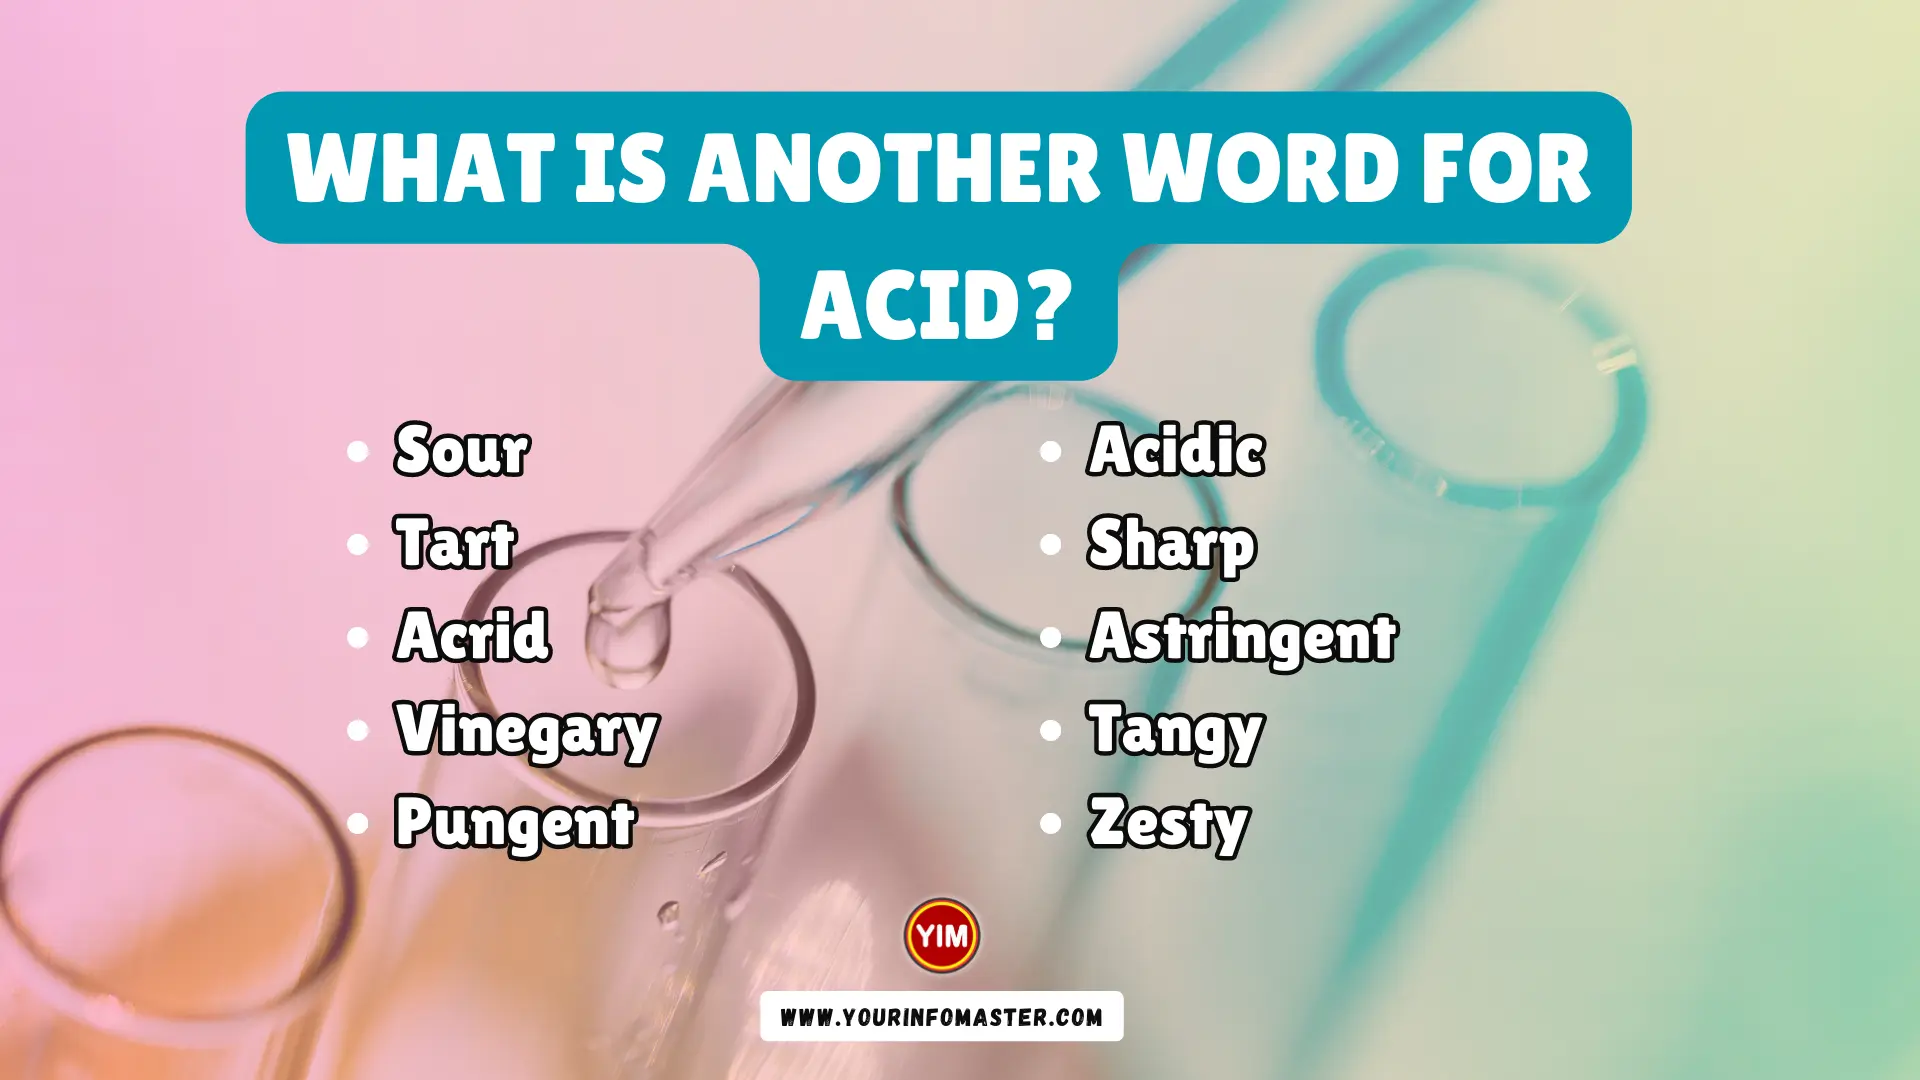 What is another word for Acid